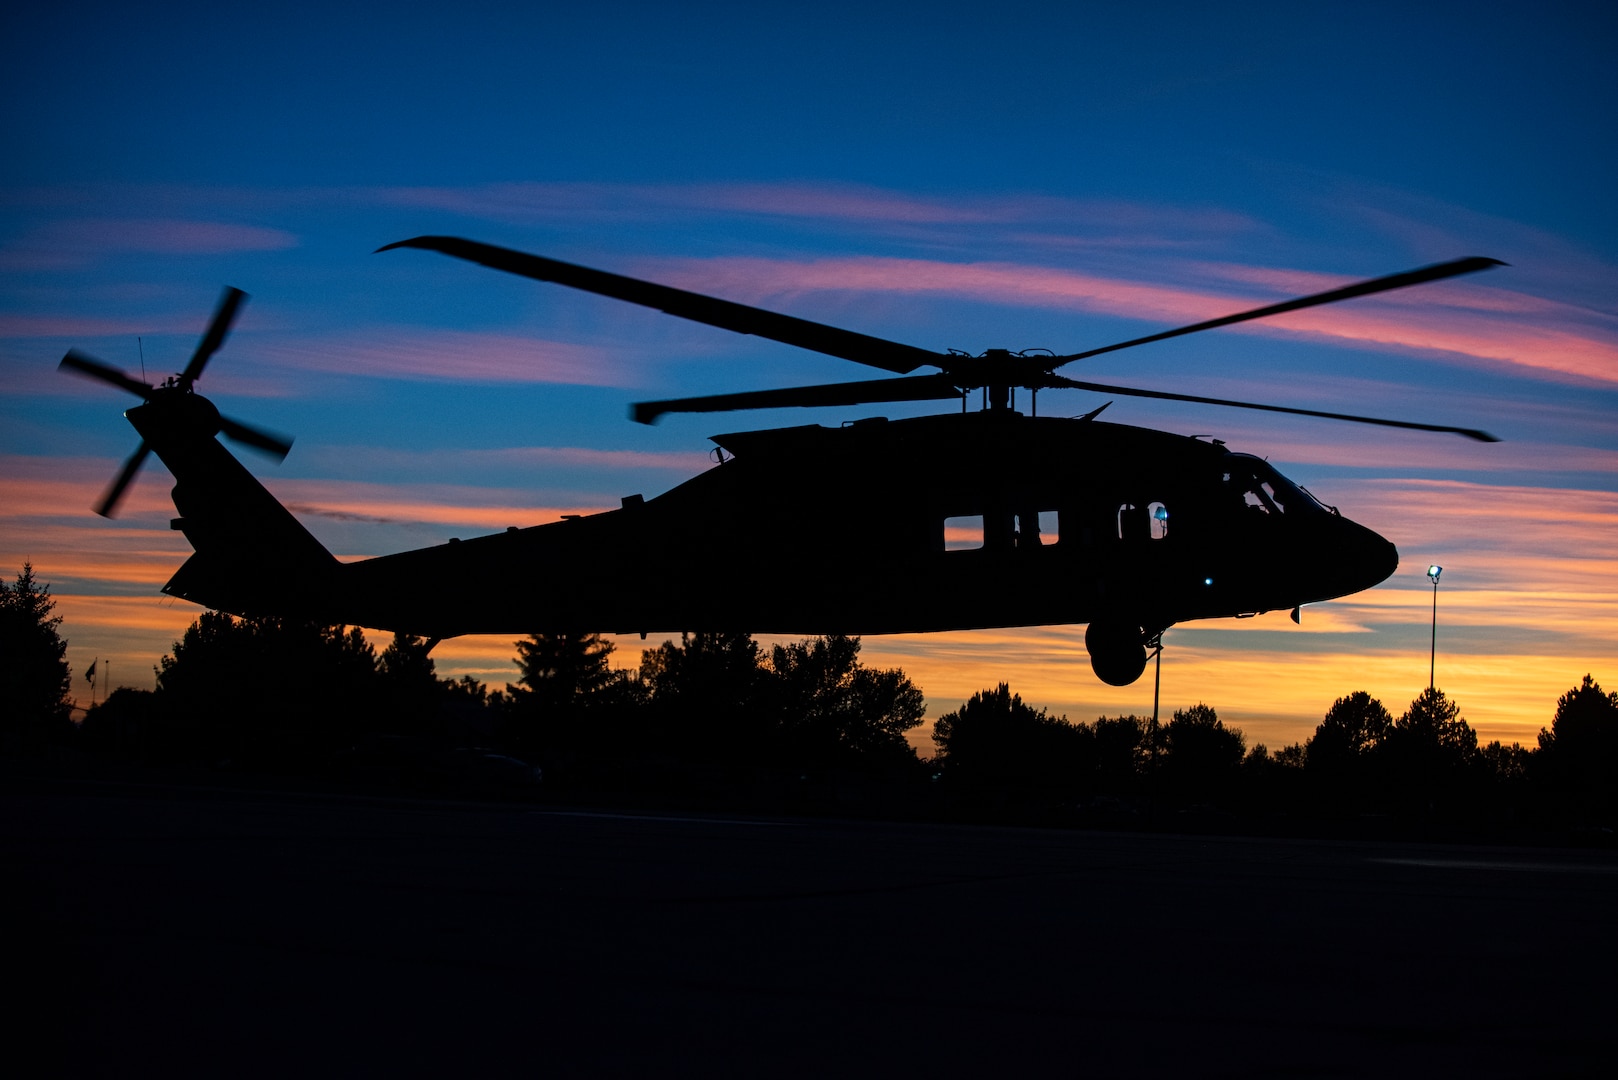 A new UH-60M Black Hawk flies into the sunset at takeoff from Gowen Field, Idaho, Sept. 23, 2021. The Idaho National Guard has replaced 20 of its UH-60L Black Hawk helicopters with UH-60M Black Hawks.